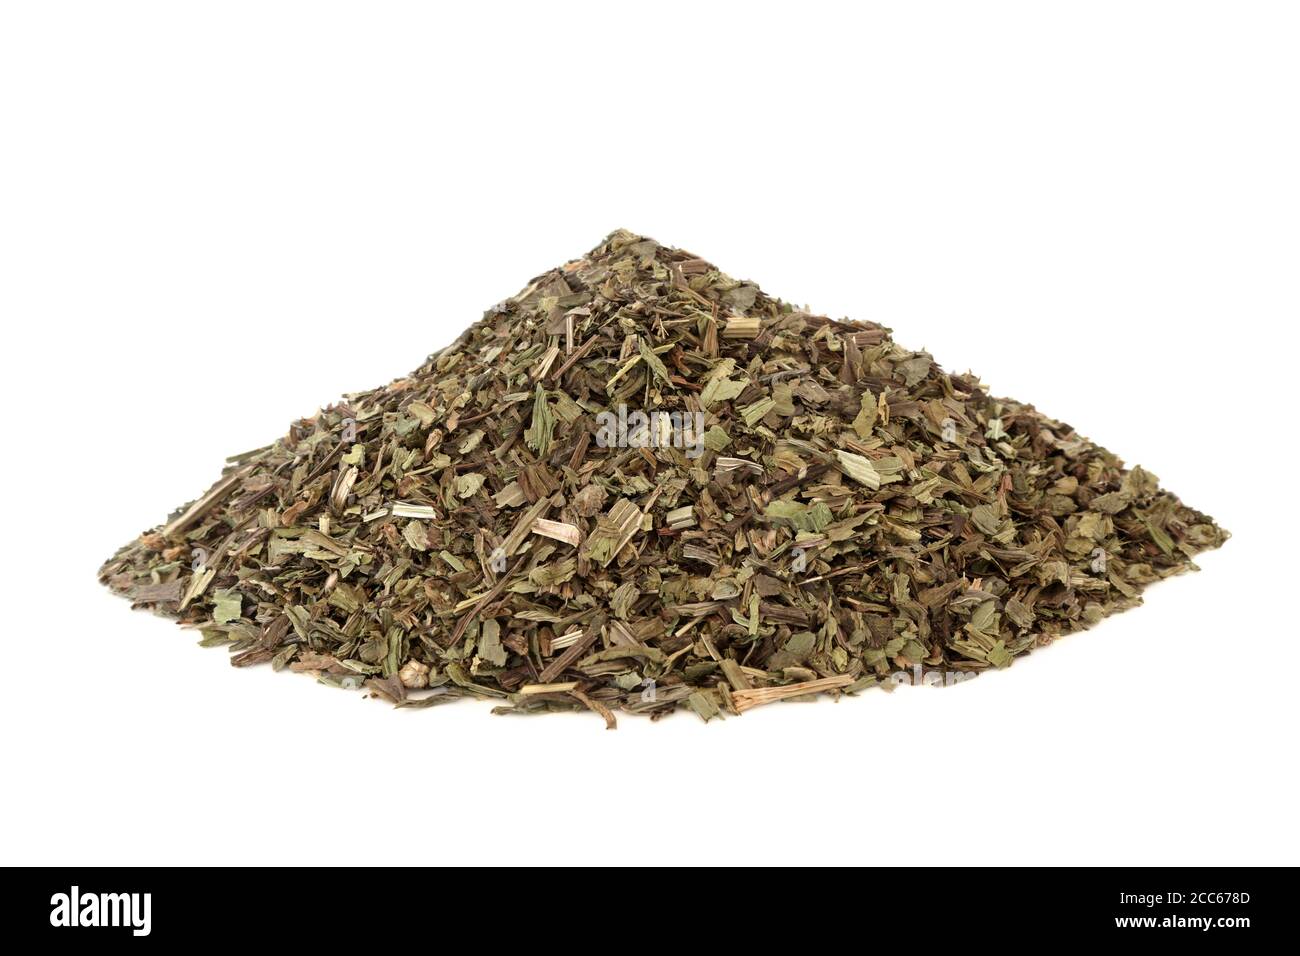 Plantain herb leaf used in herbal medicine to treat bladder infections, bronchitis, colds, bleeding hemorrhoids, skin conditions and eye irritation. Stock Photo